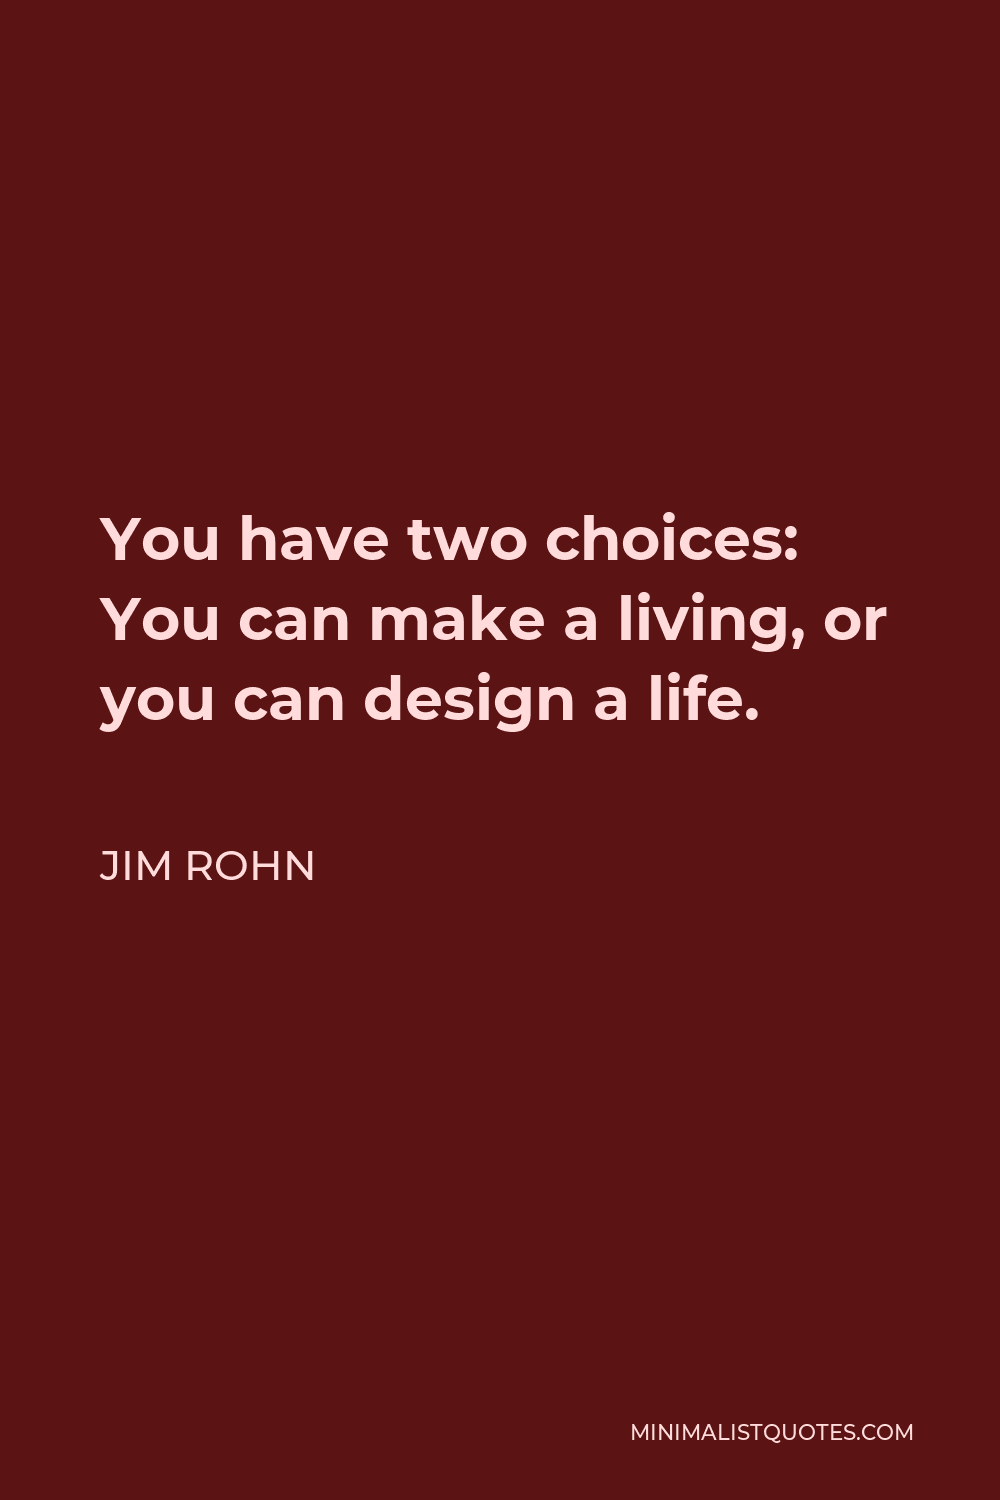 Jim Rohn Quote - You have two choices: You can make a living, or you can design a life.